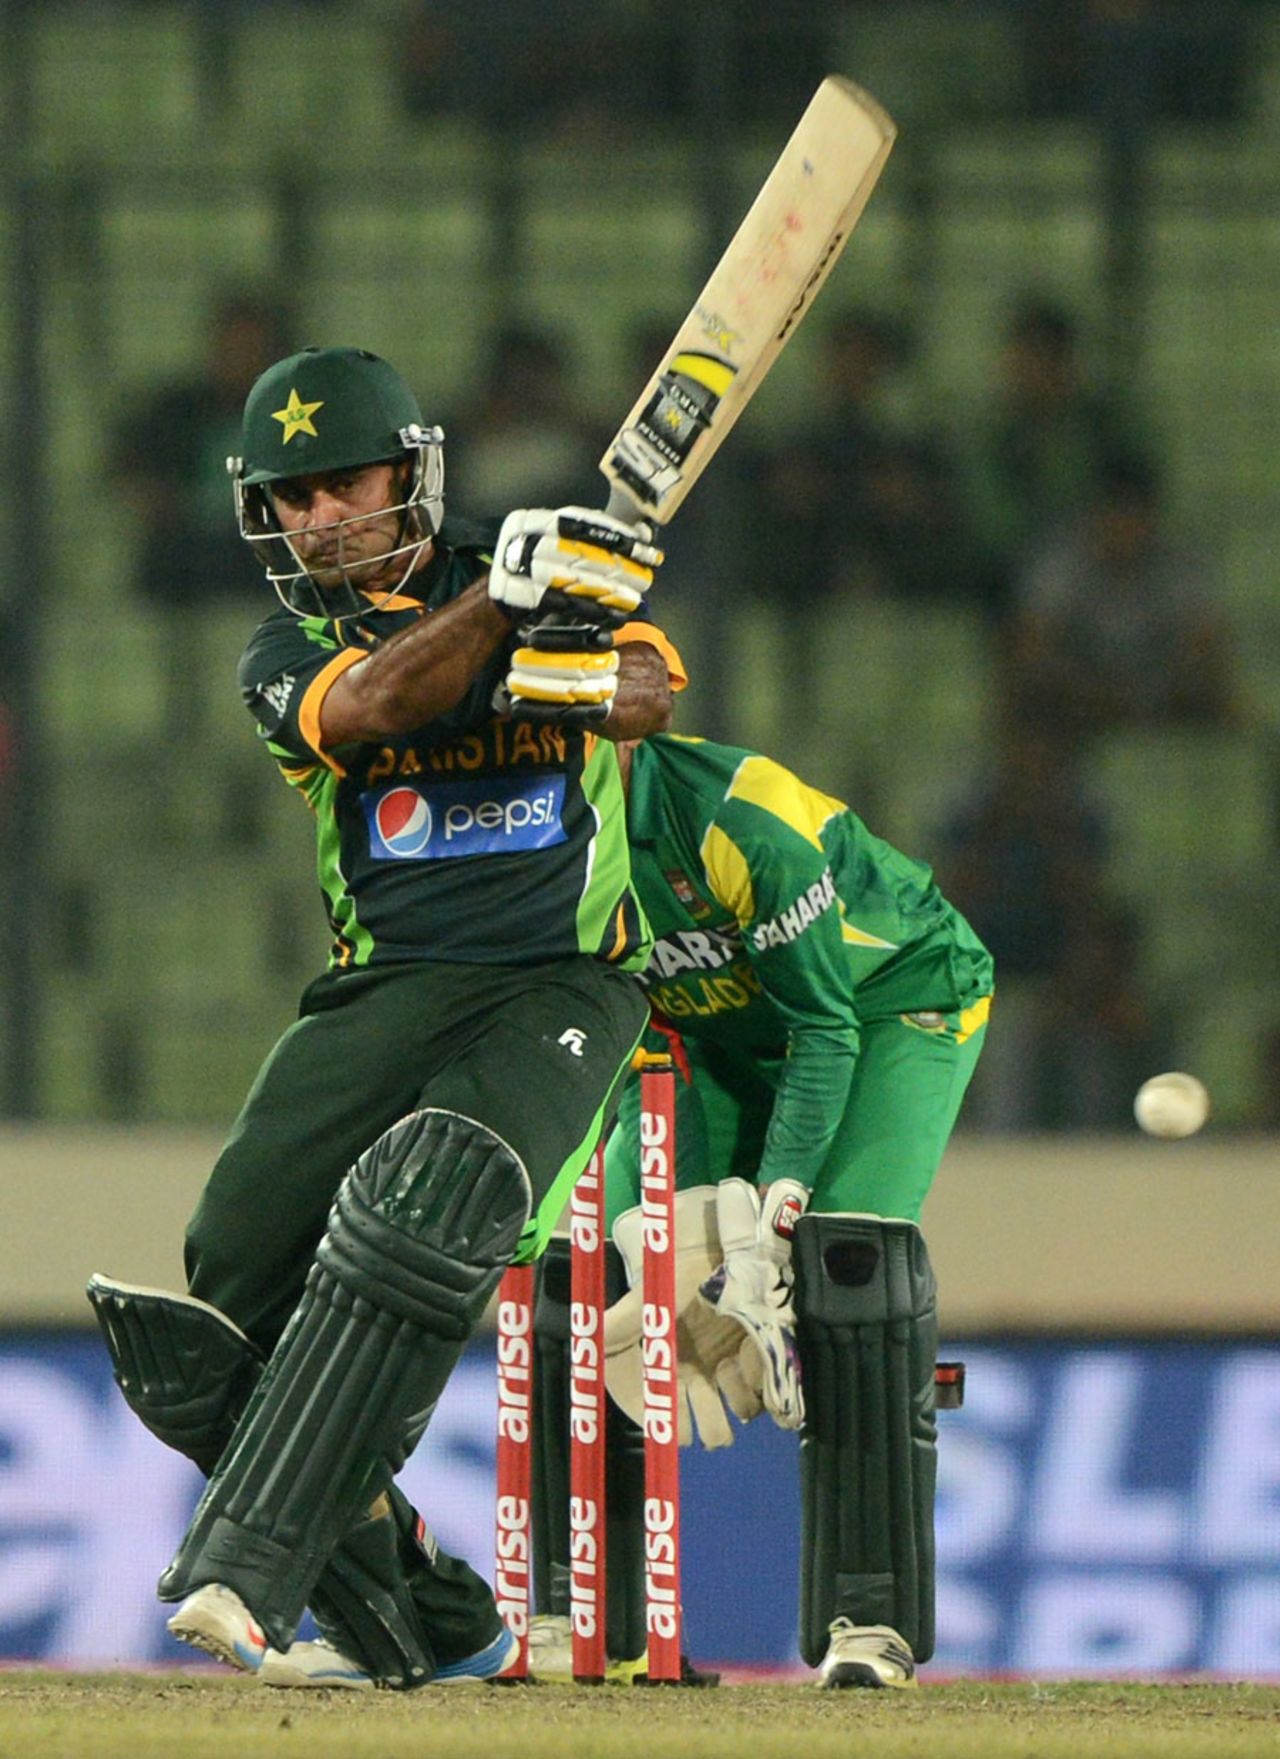 Mohammad Hafeez scored 52, Bangladesh v Pakistan, Asia Cup, Mirpur, March 4, 2014